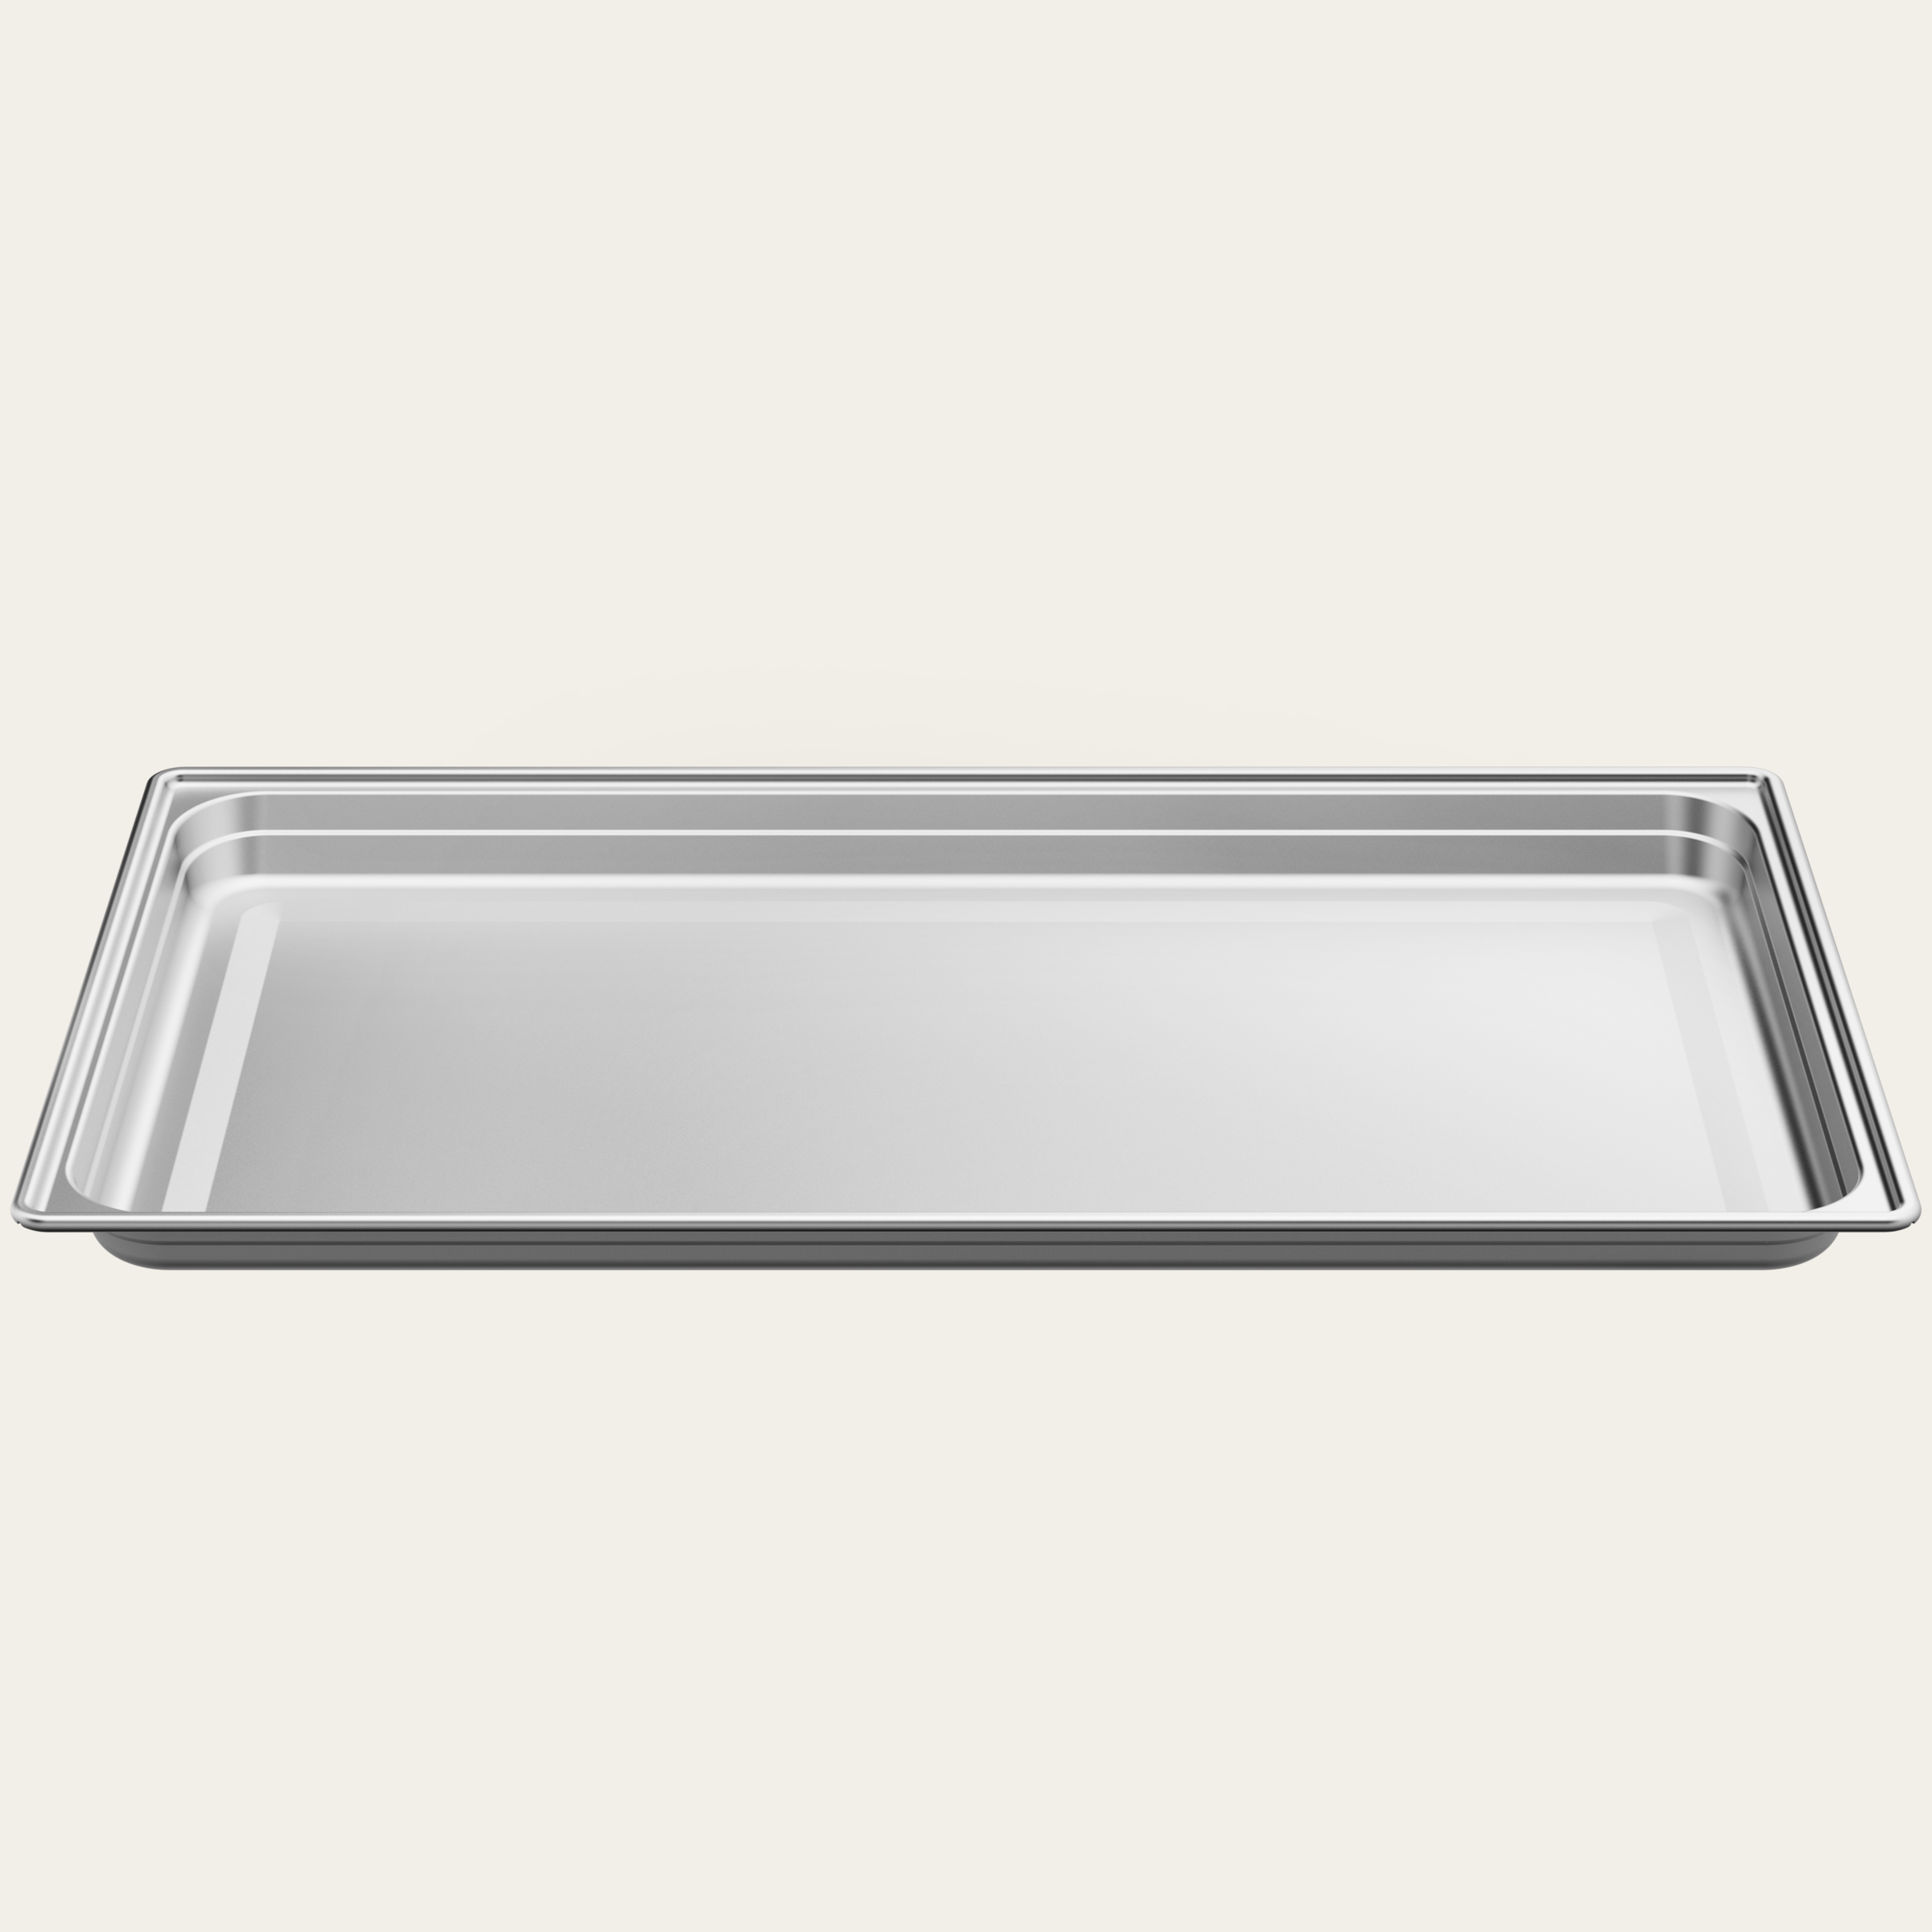 Stainless steel tray unperforated, W 629 x D 370 x H 28 mm